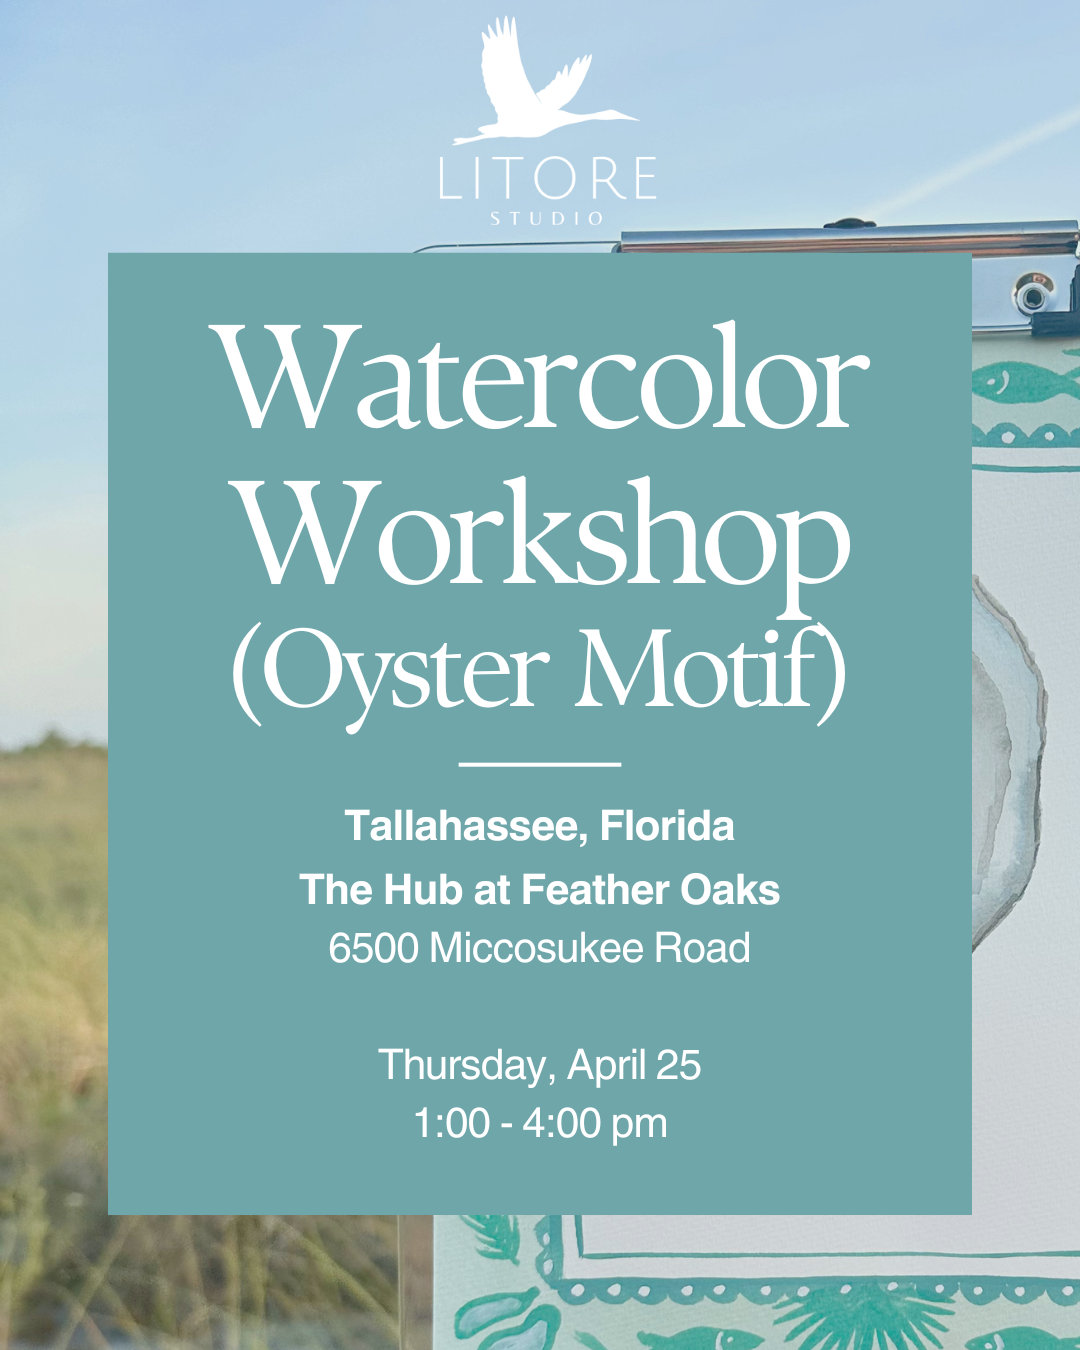 Watercolor Workshop at The Hub (Oyster Motif)